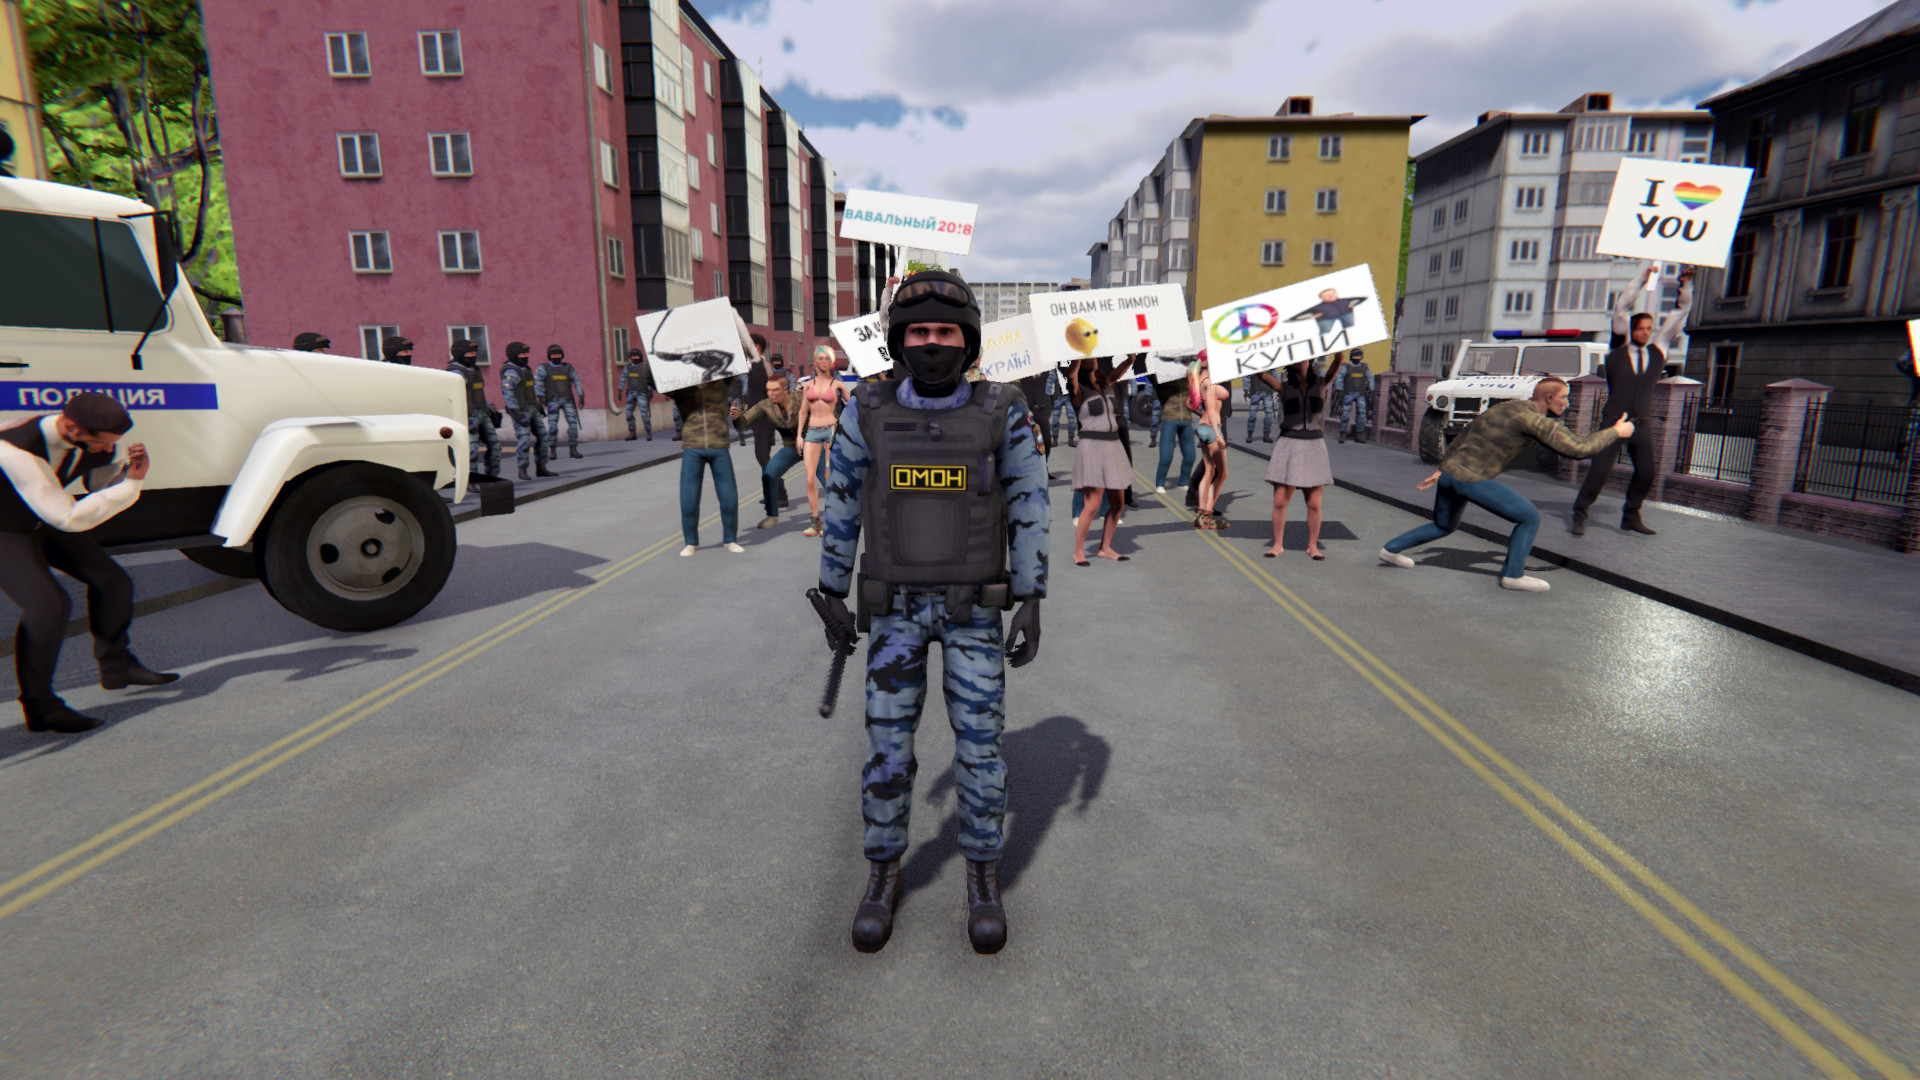 Save 51 On Omon Simulator On Steam - playing roblox the streets as a police officer